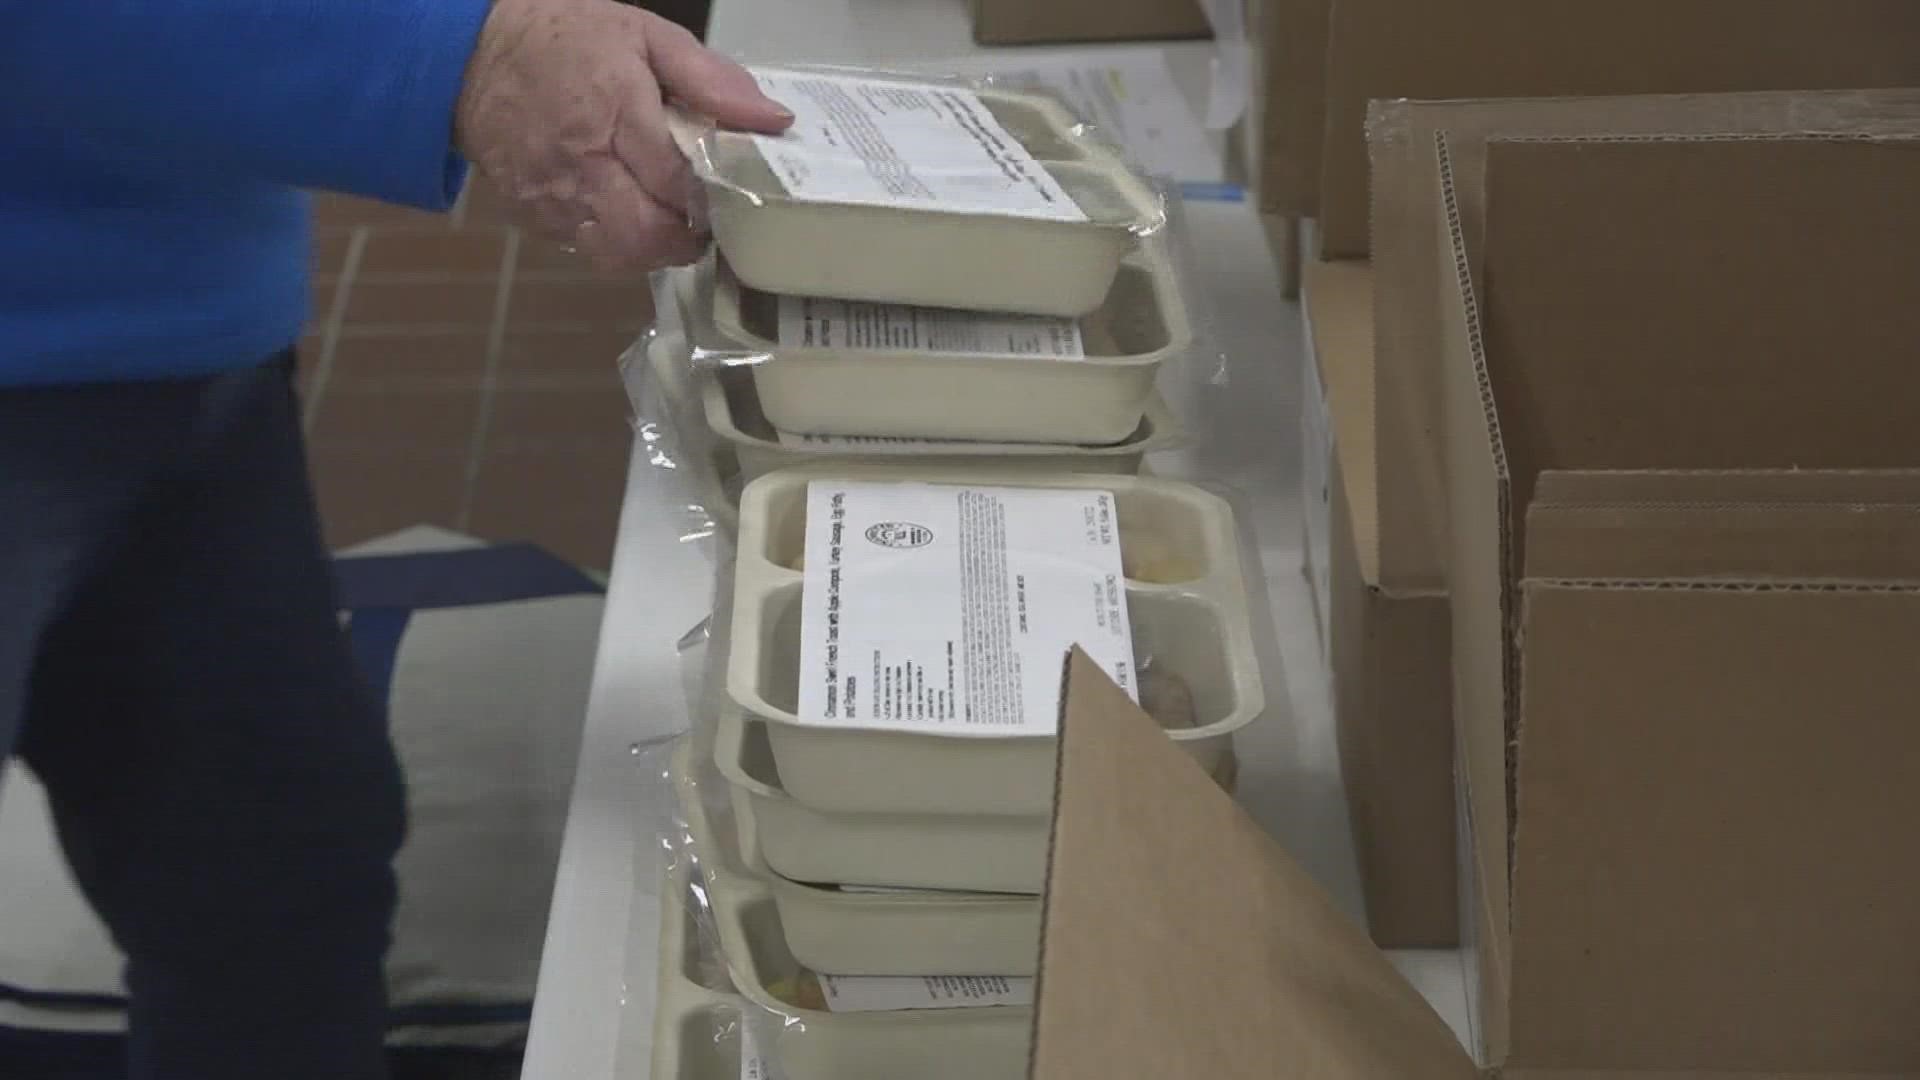 The Eastern Area Agency on Aging provides meals for over 700 homebound Mainers in 4 different counties.